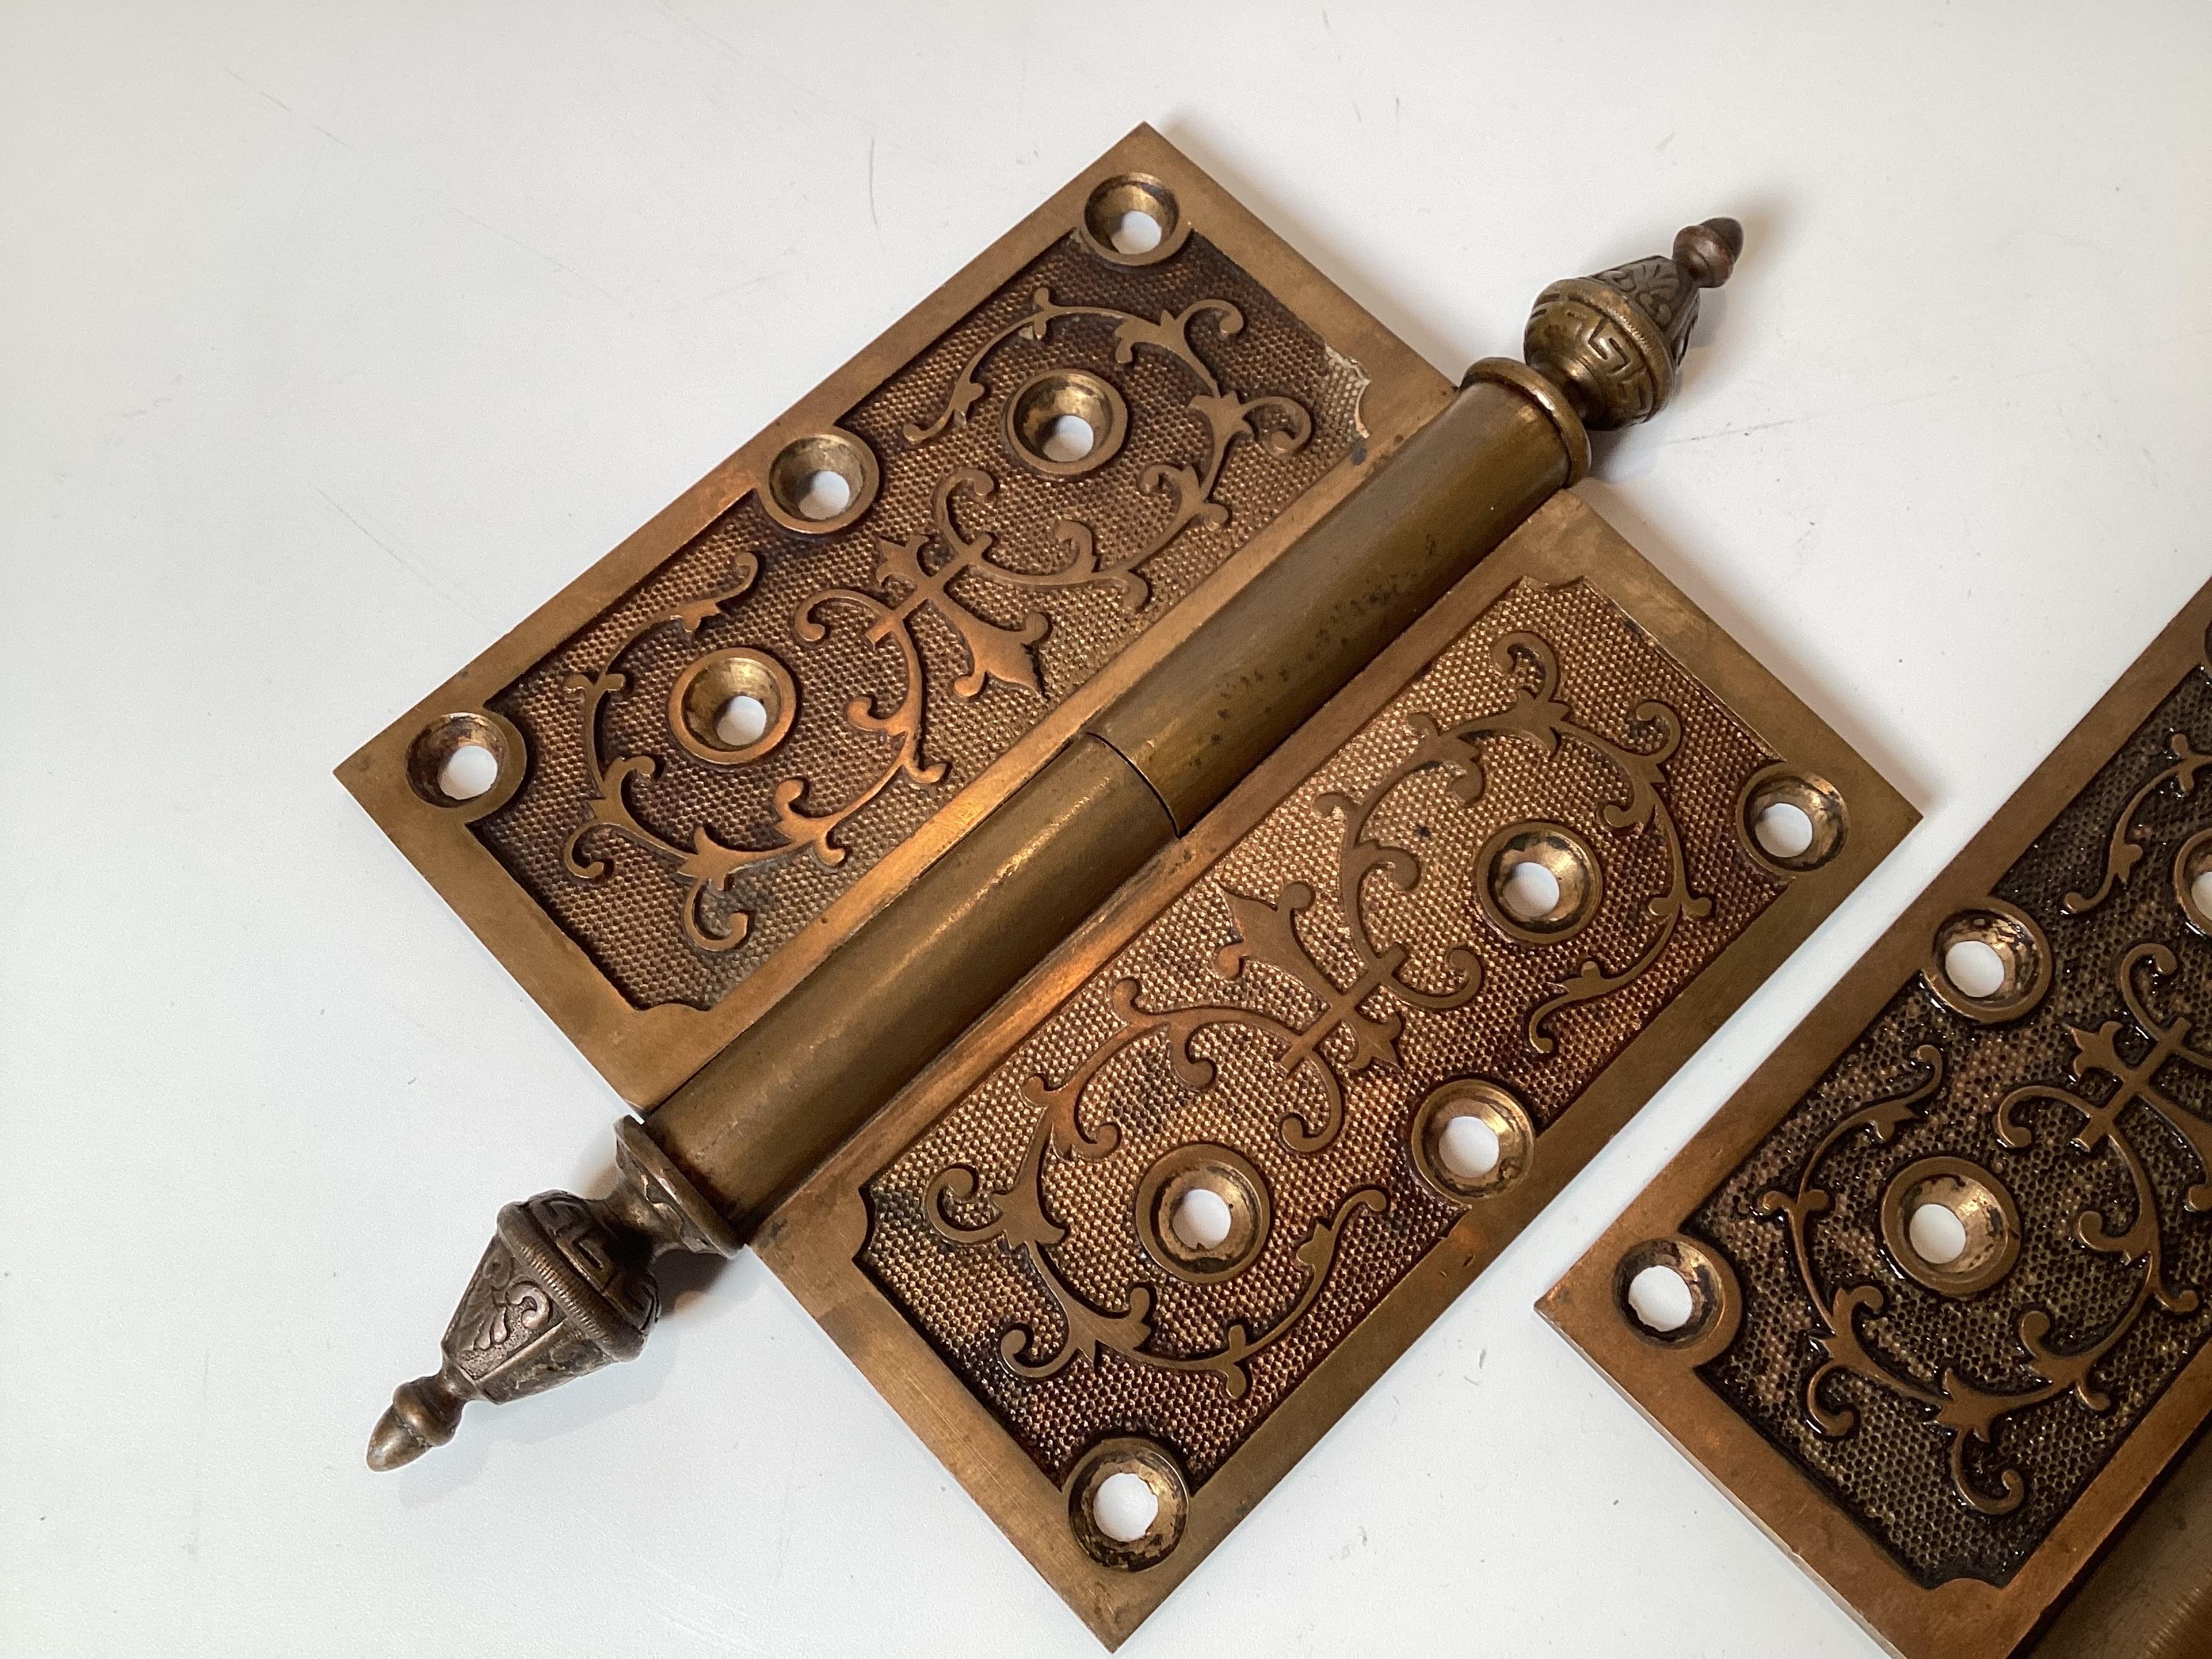 A pair of large cast bronze Victorian hinges. The hinges with pointed finials and a cast design on the surface.